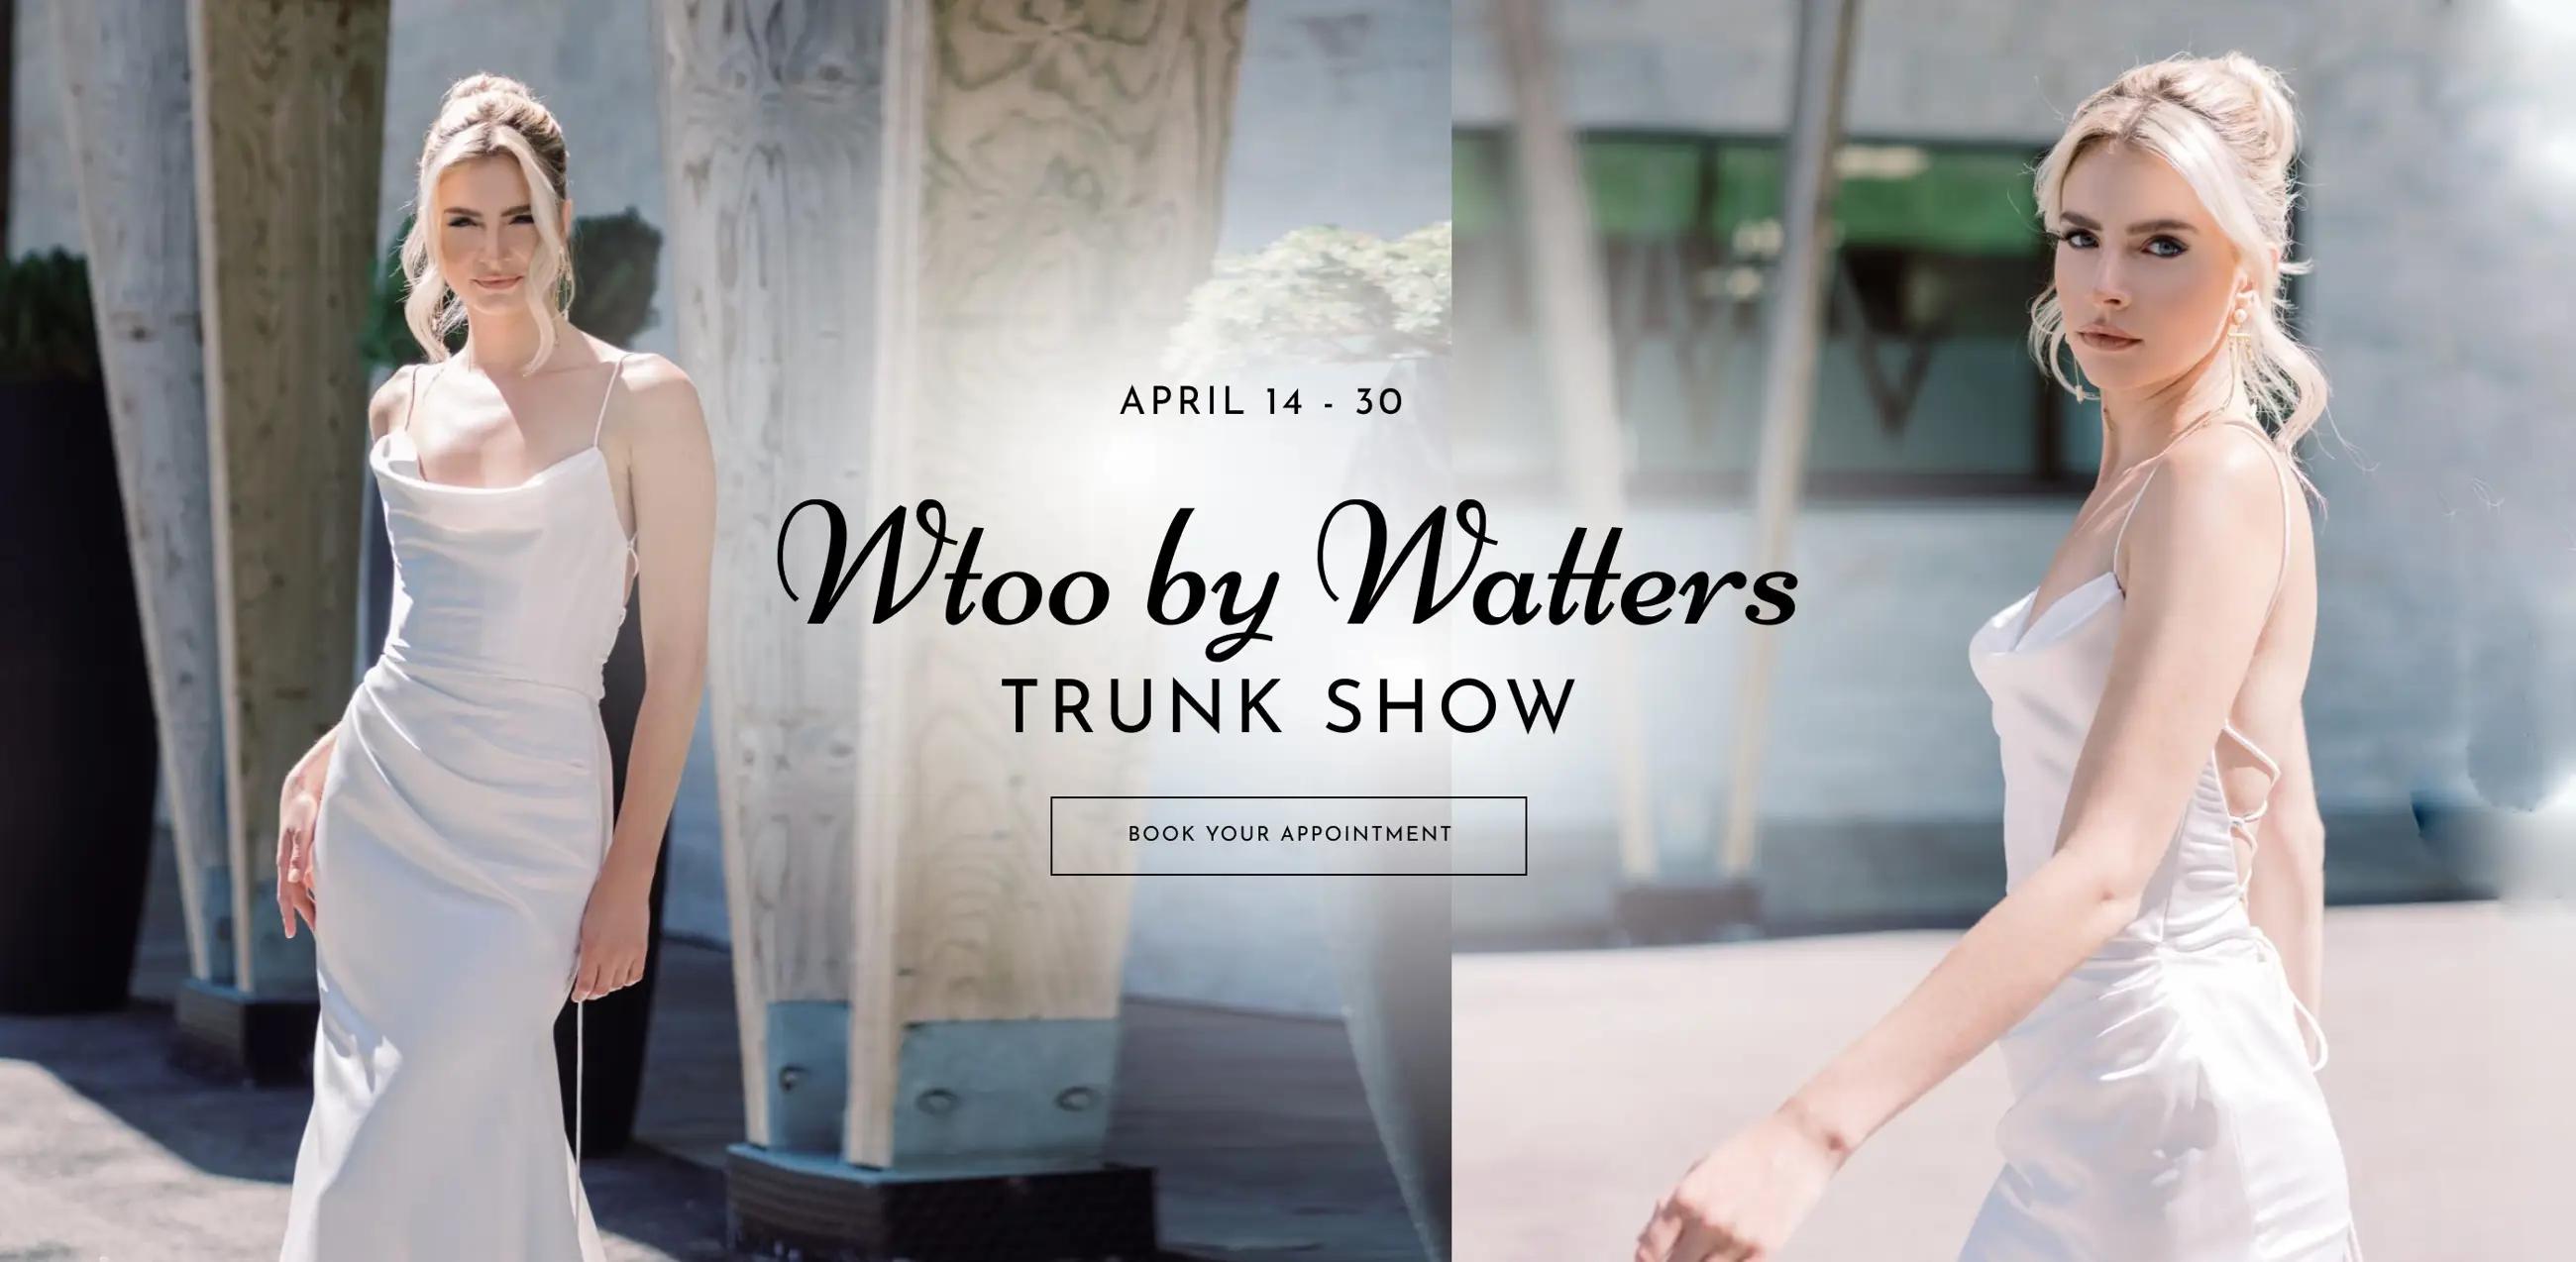 Wtoo by Watters Trunk Show banner